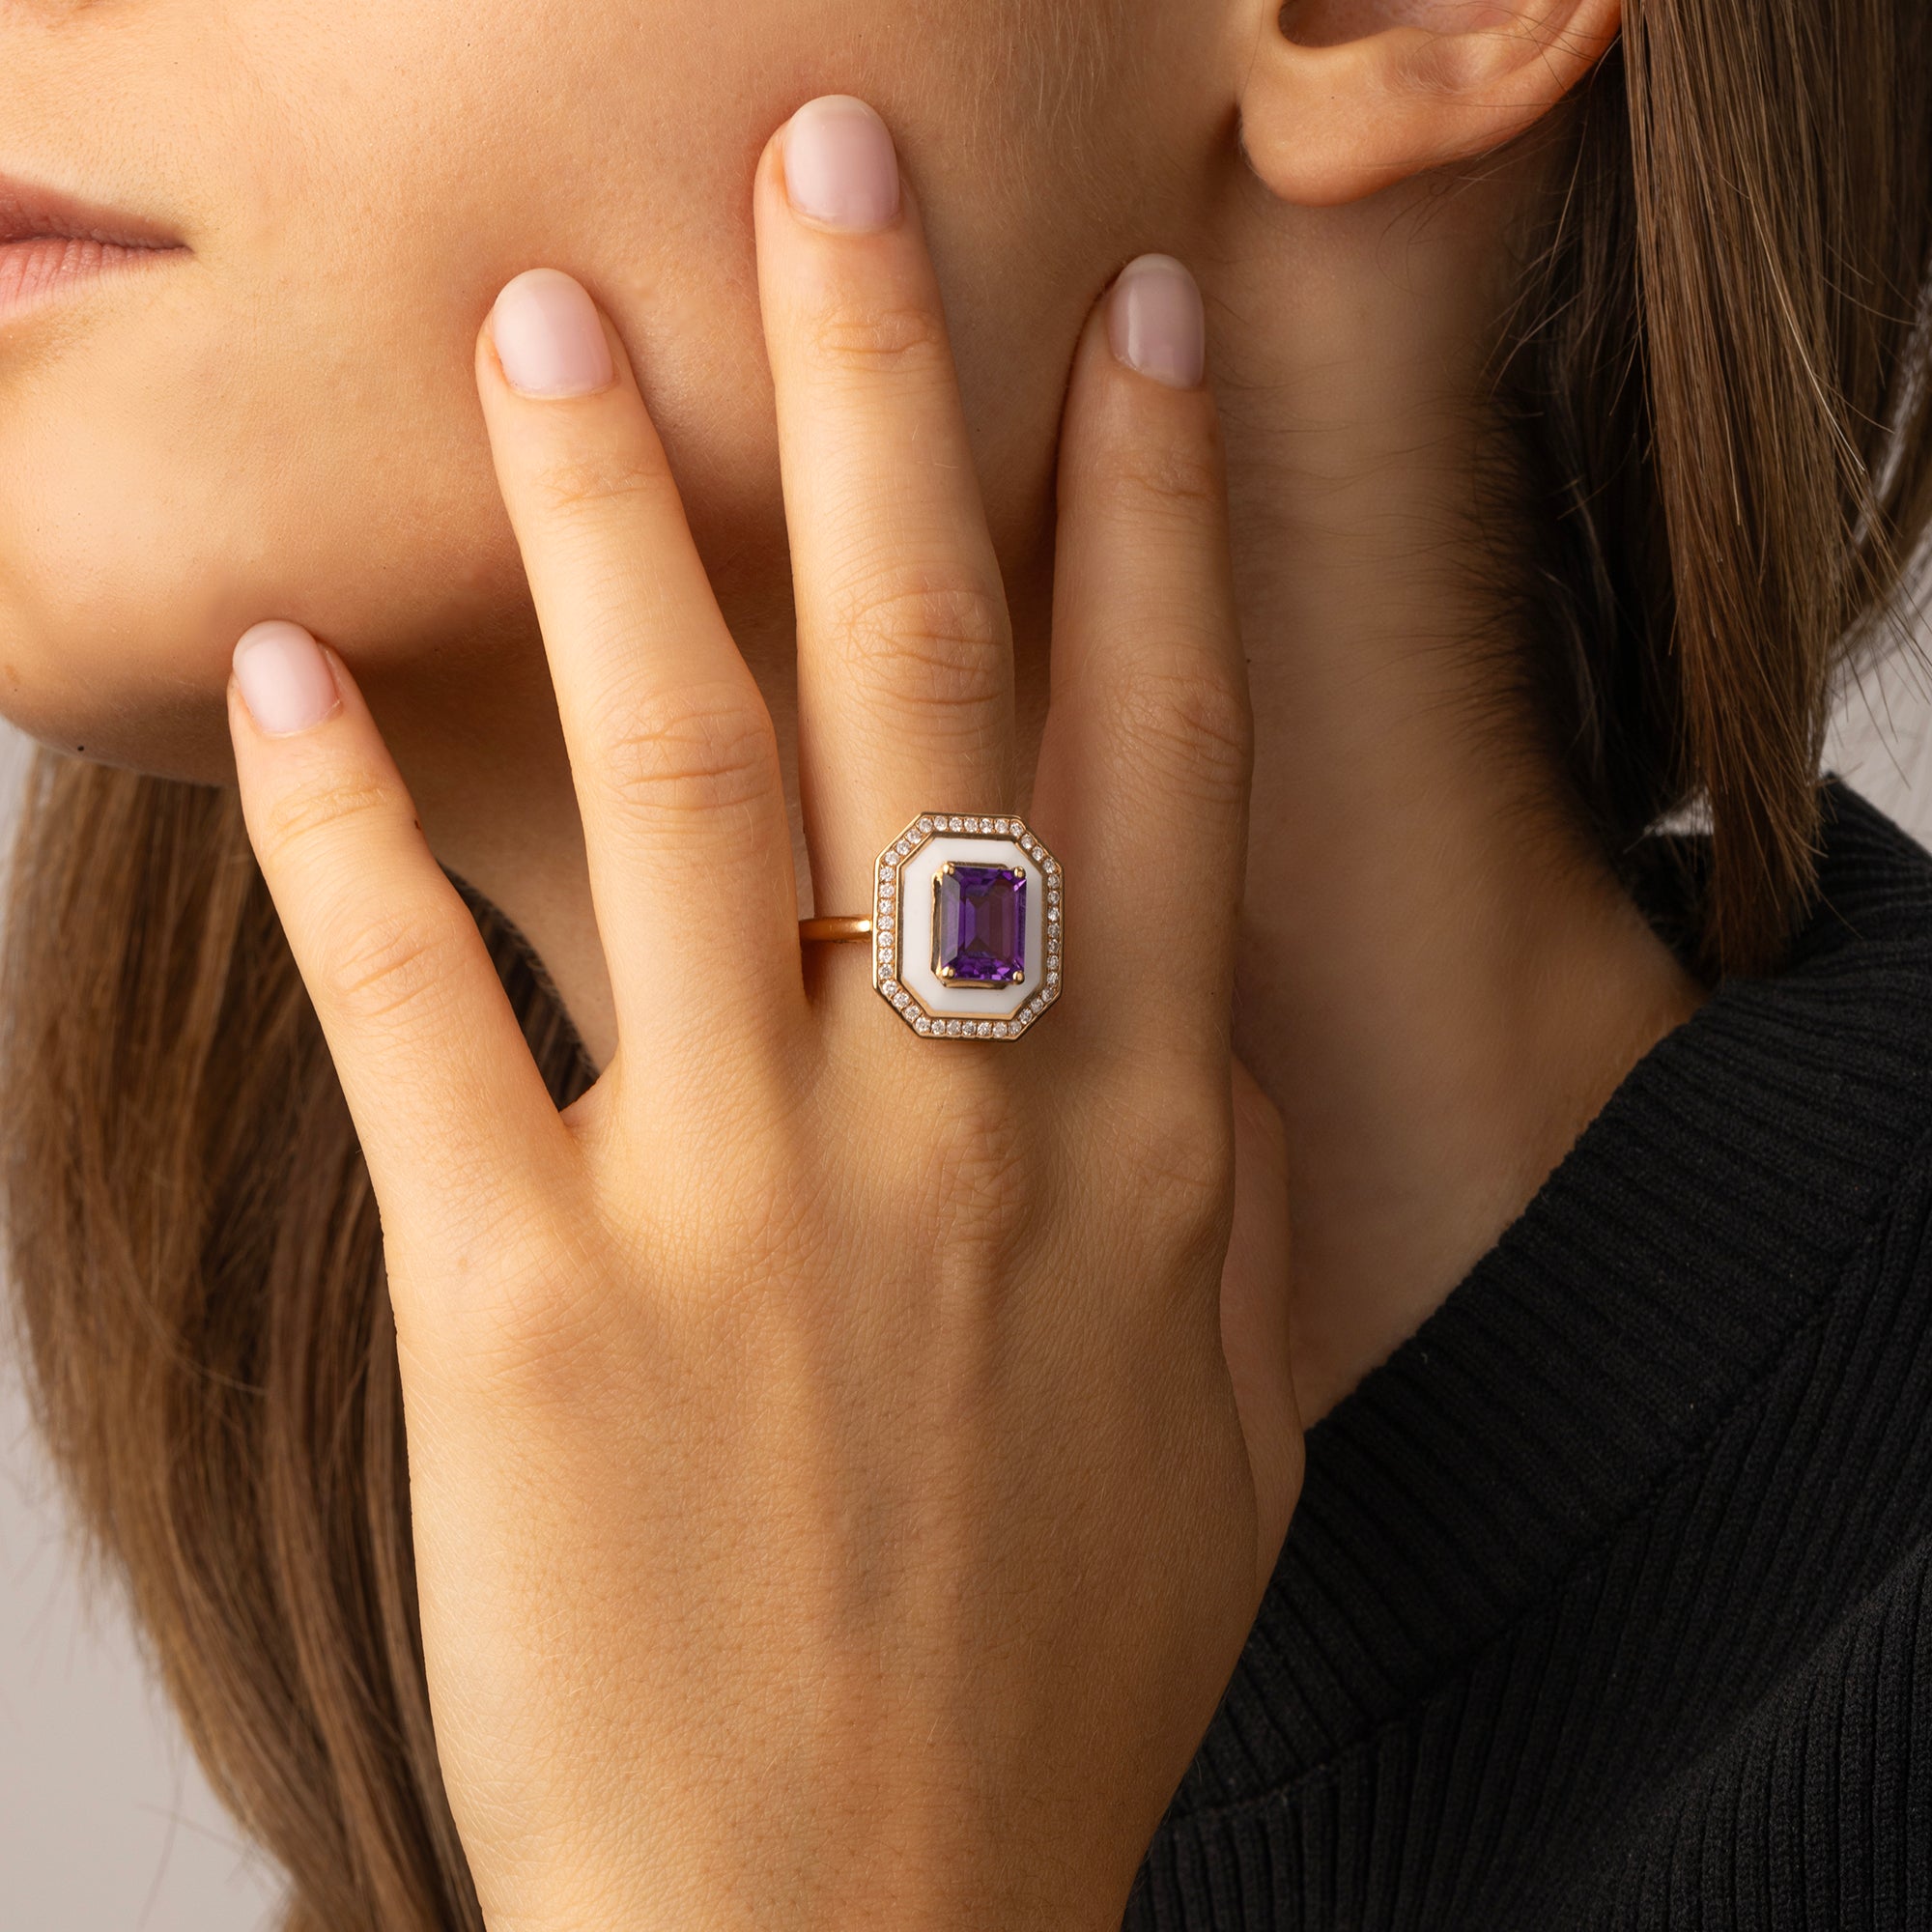 Fizzy White Classic Ring with Amethyst